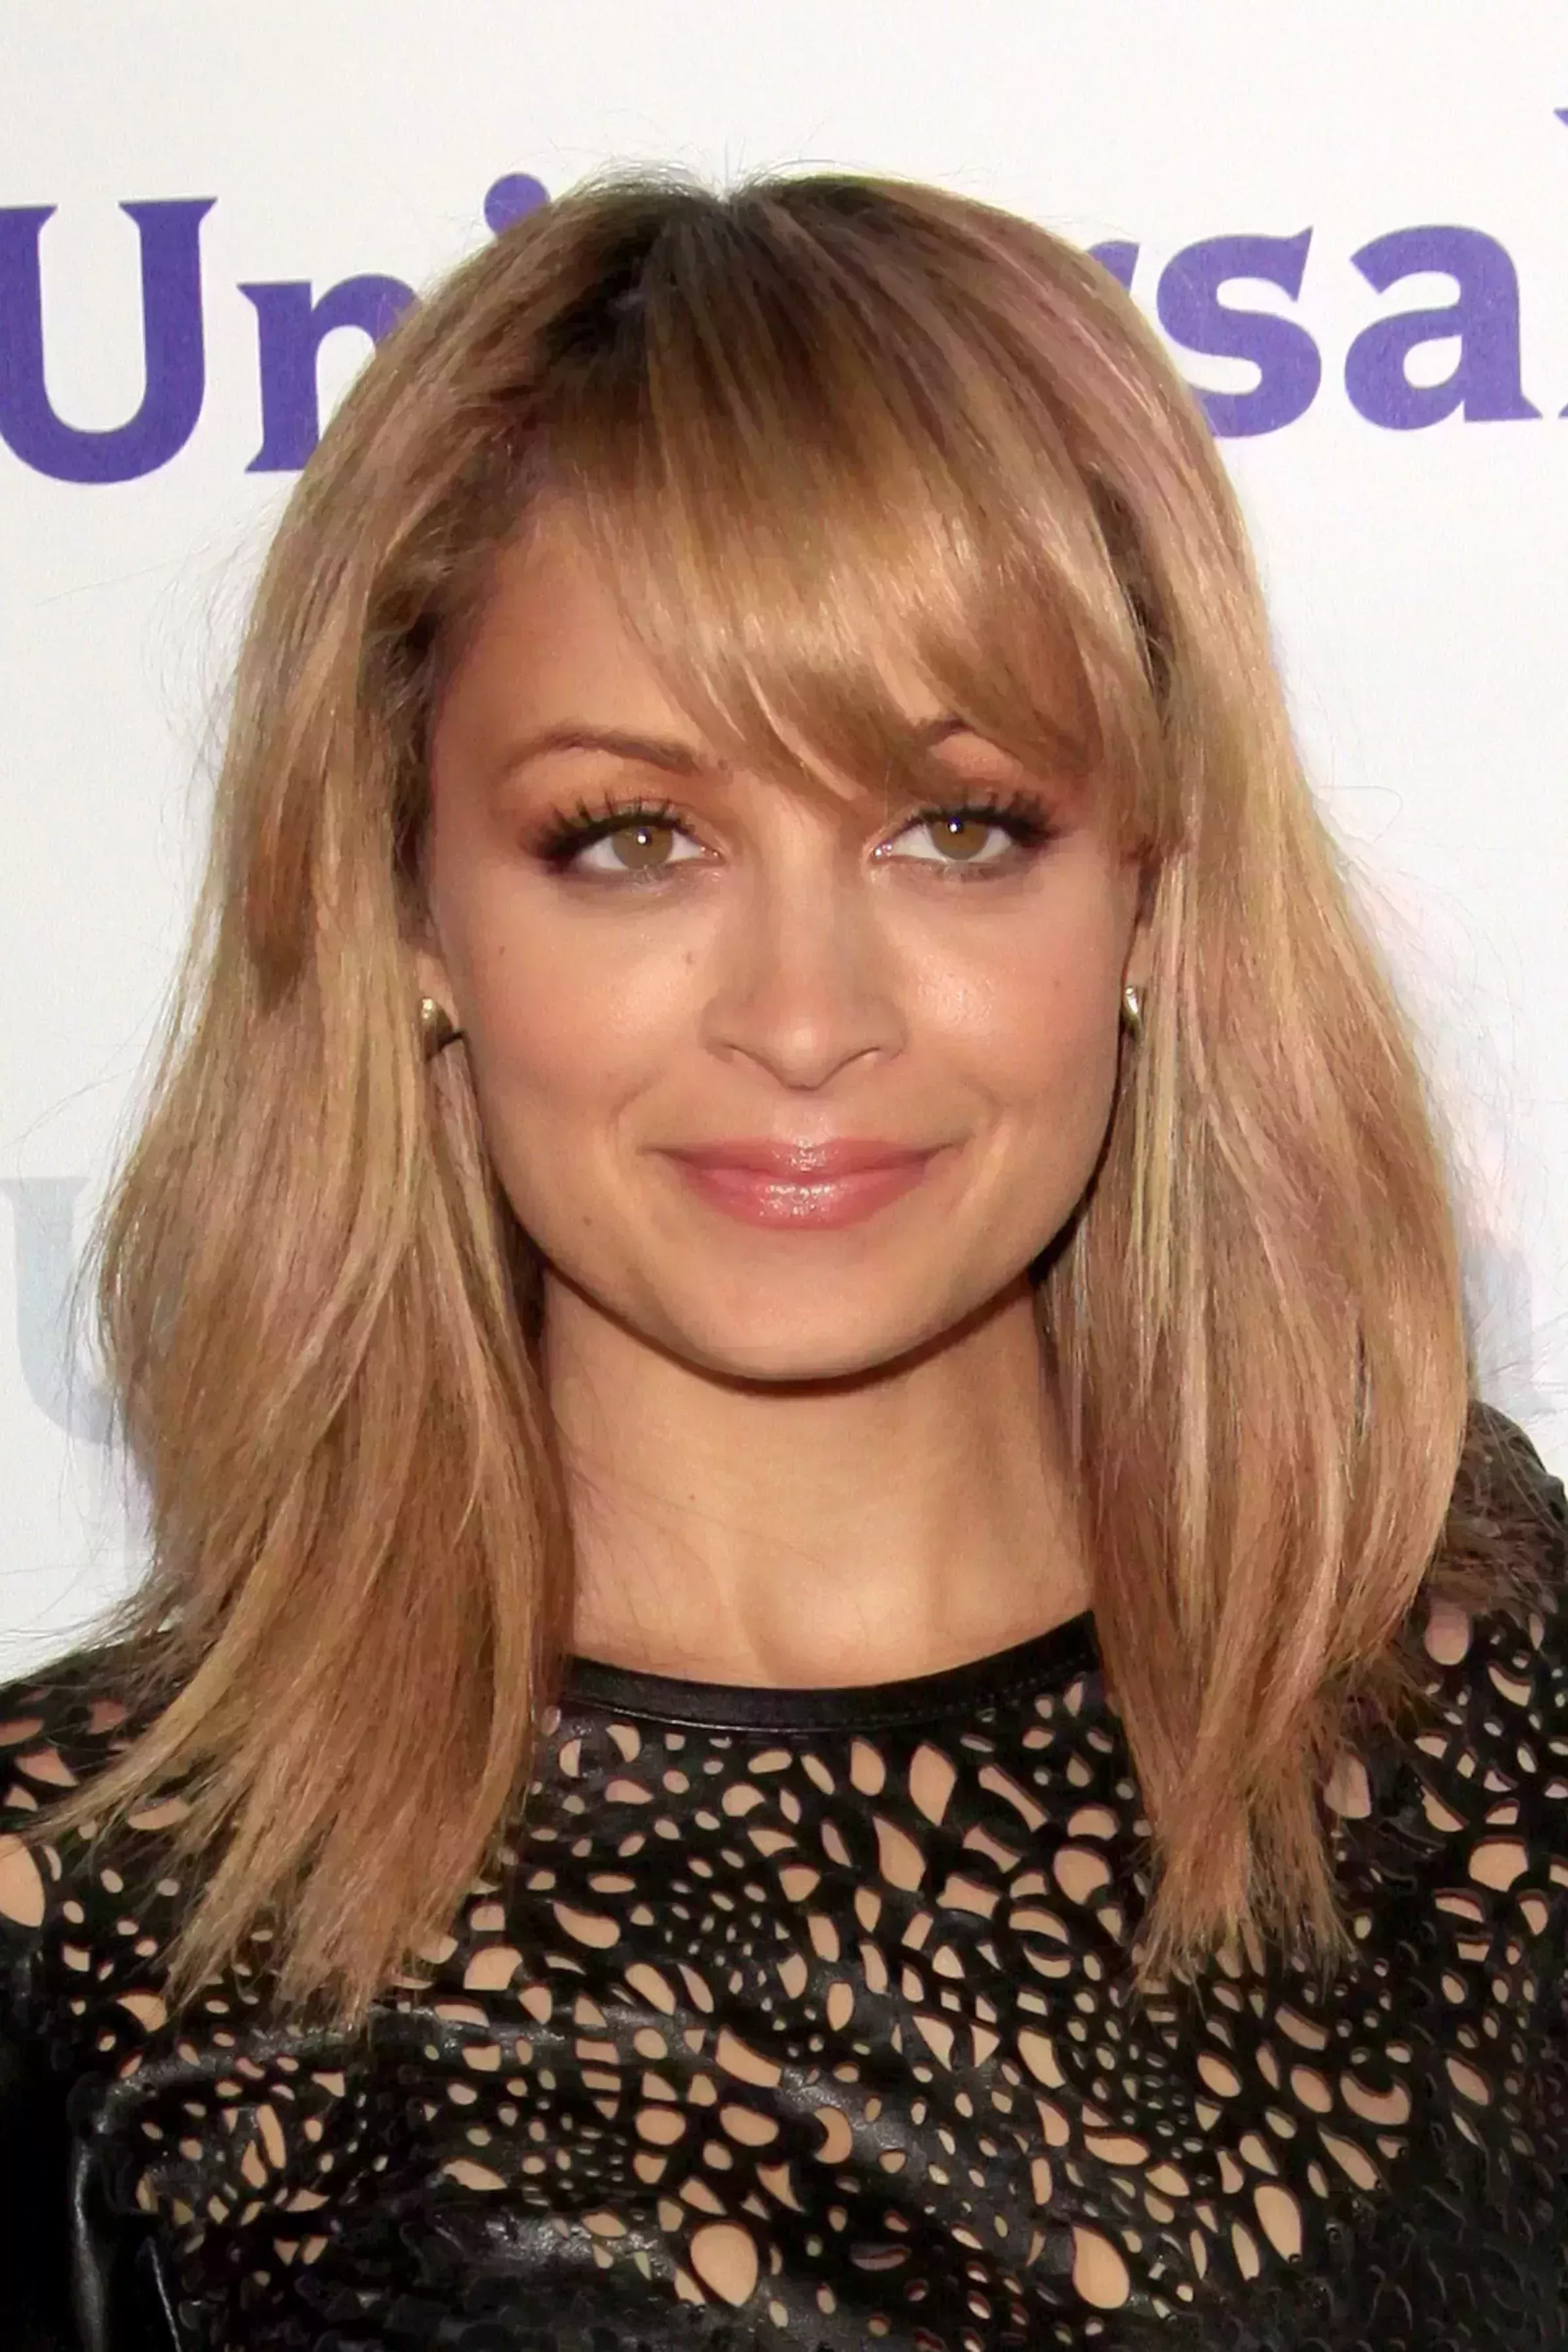 Nicole Richie’s Layered Cut With Side Bangs